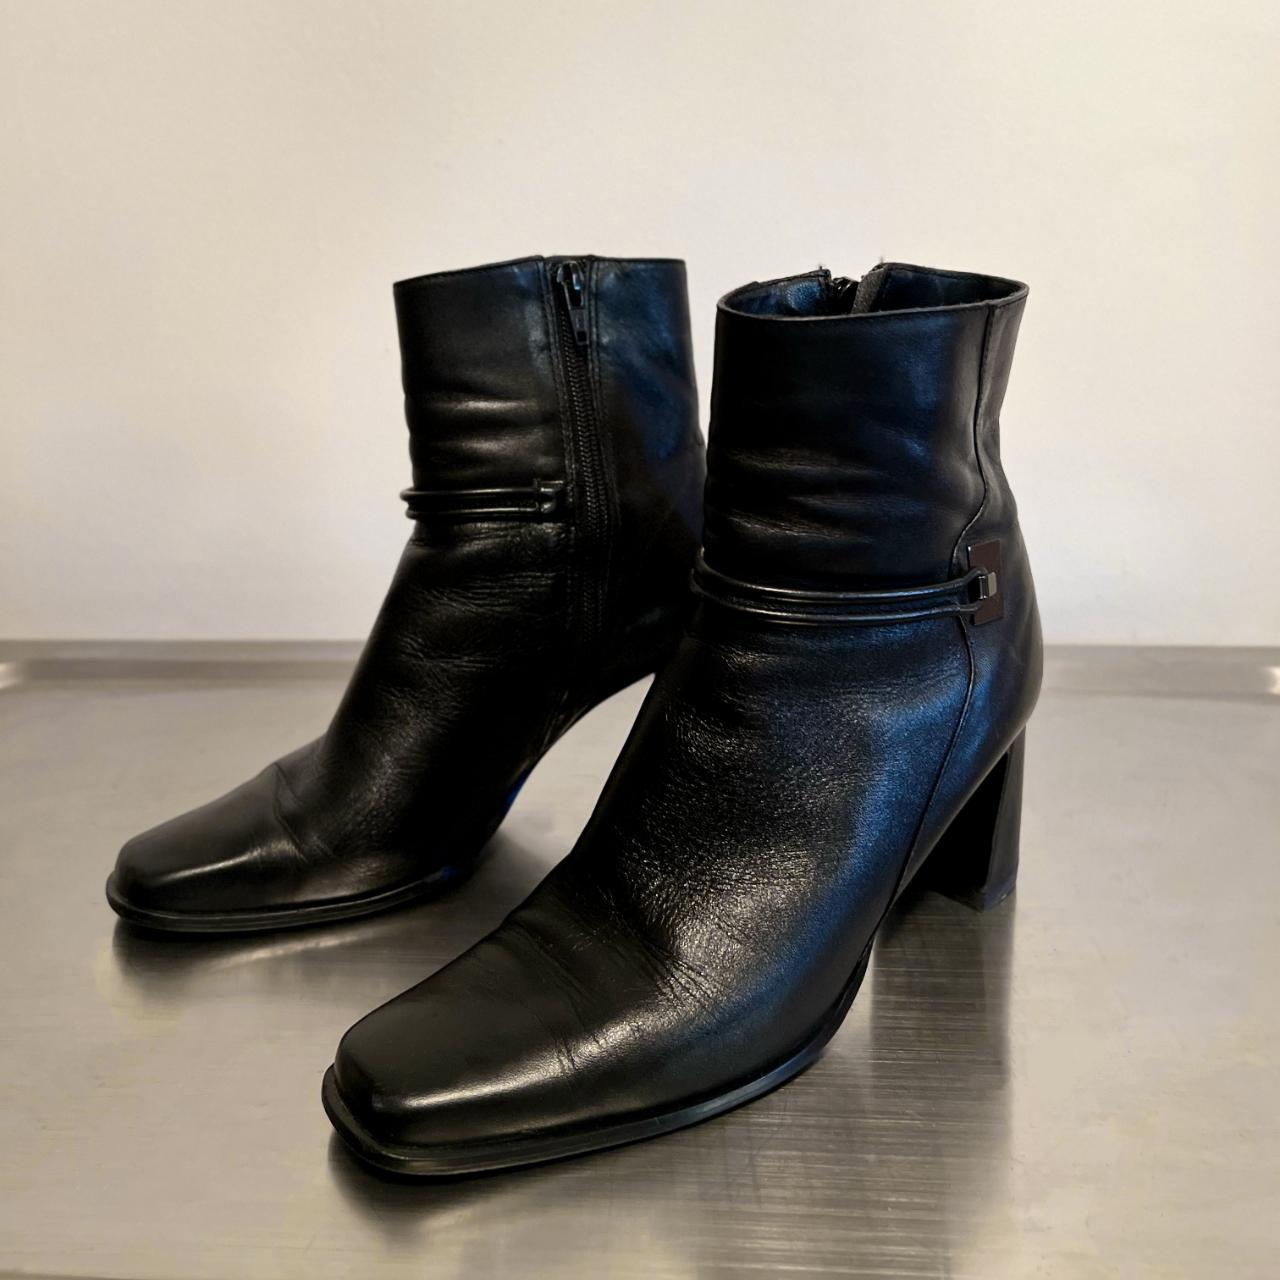 These size 6 1/2 booties showcase a sleek and... - Depop